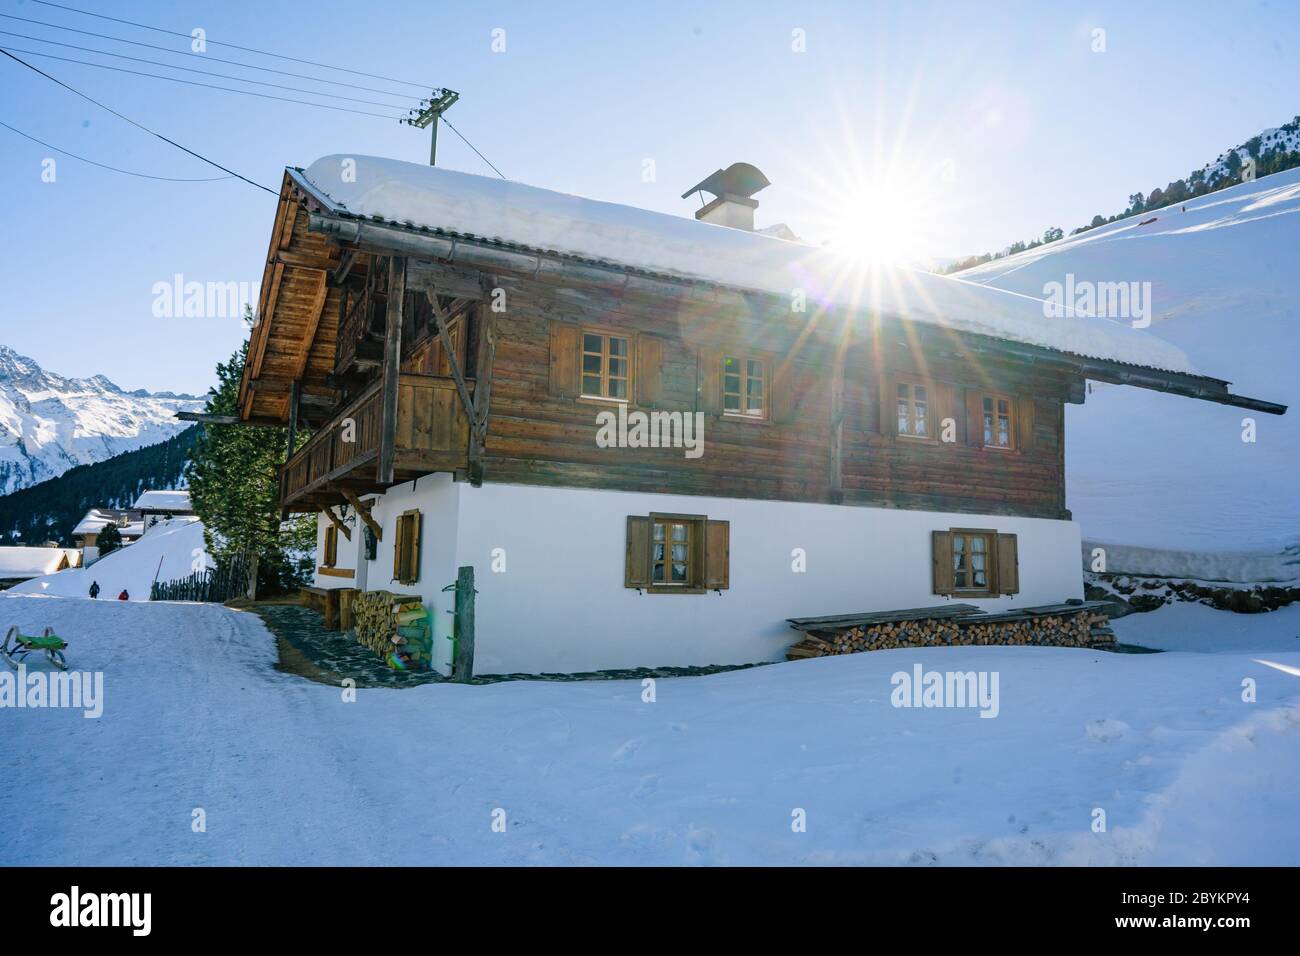 Classic mountain huts in Praxmar and in the Sellrain Valley, Austria. Perfect for sociable fun in the snow! Stock Photo